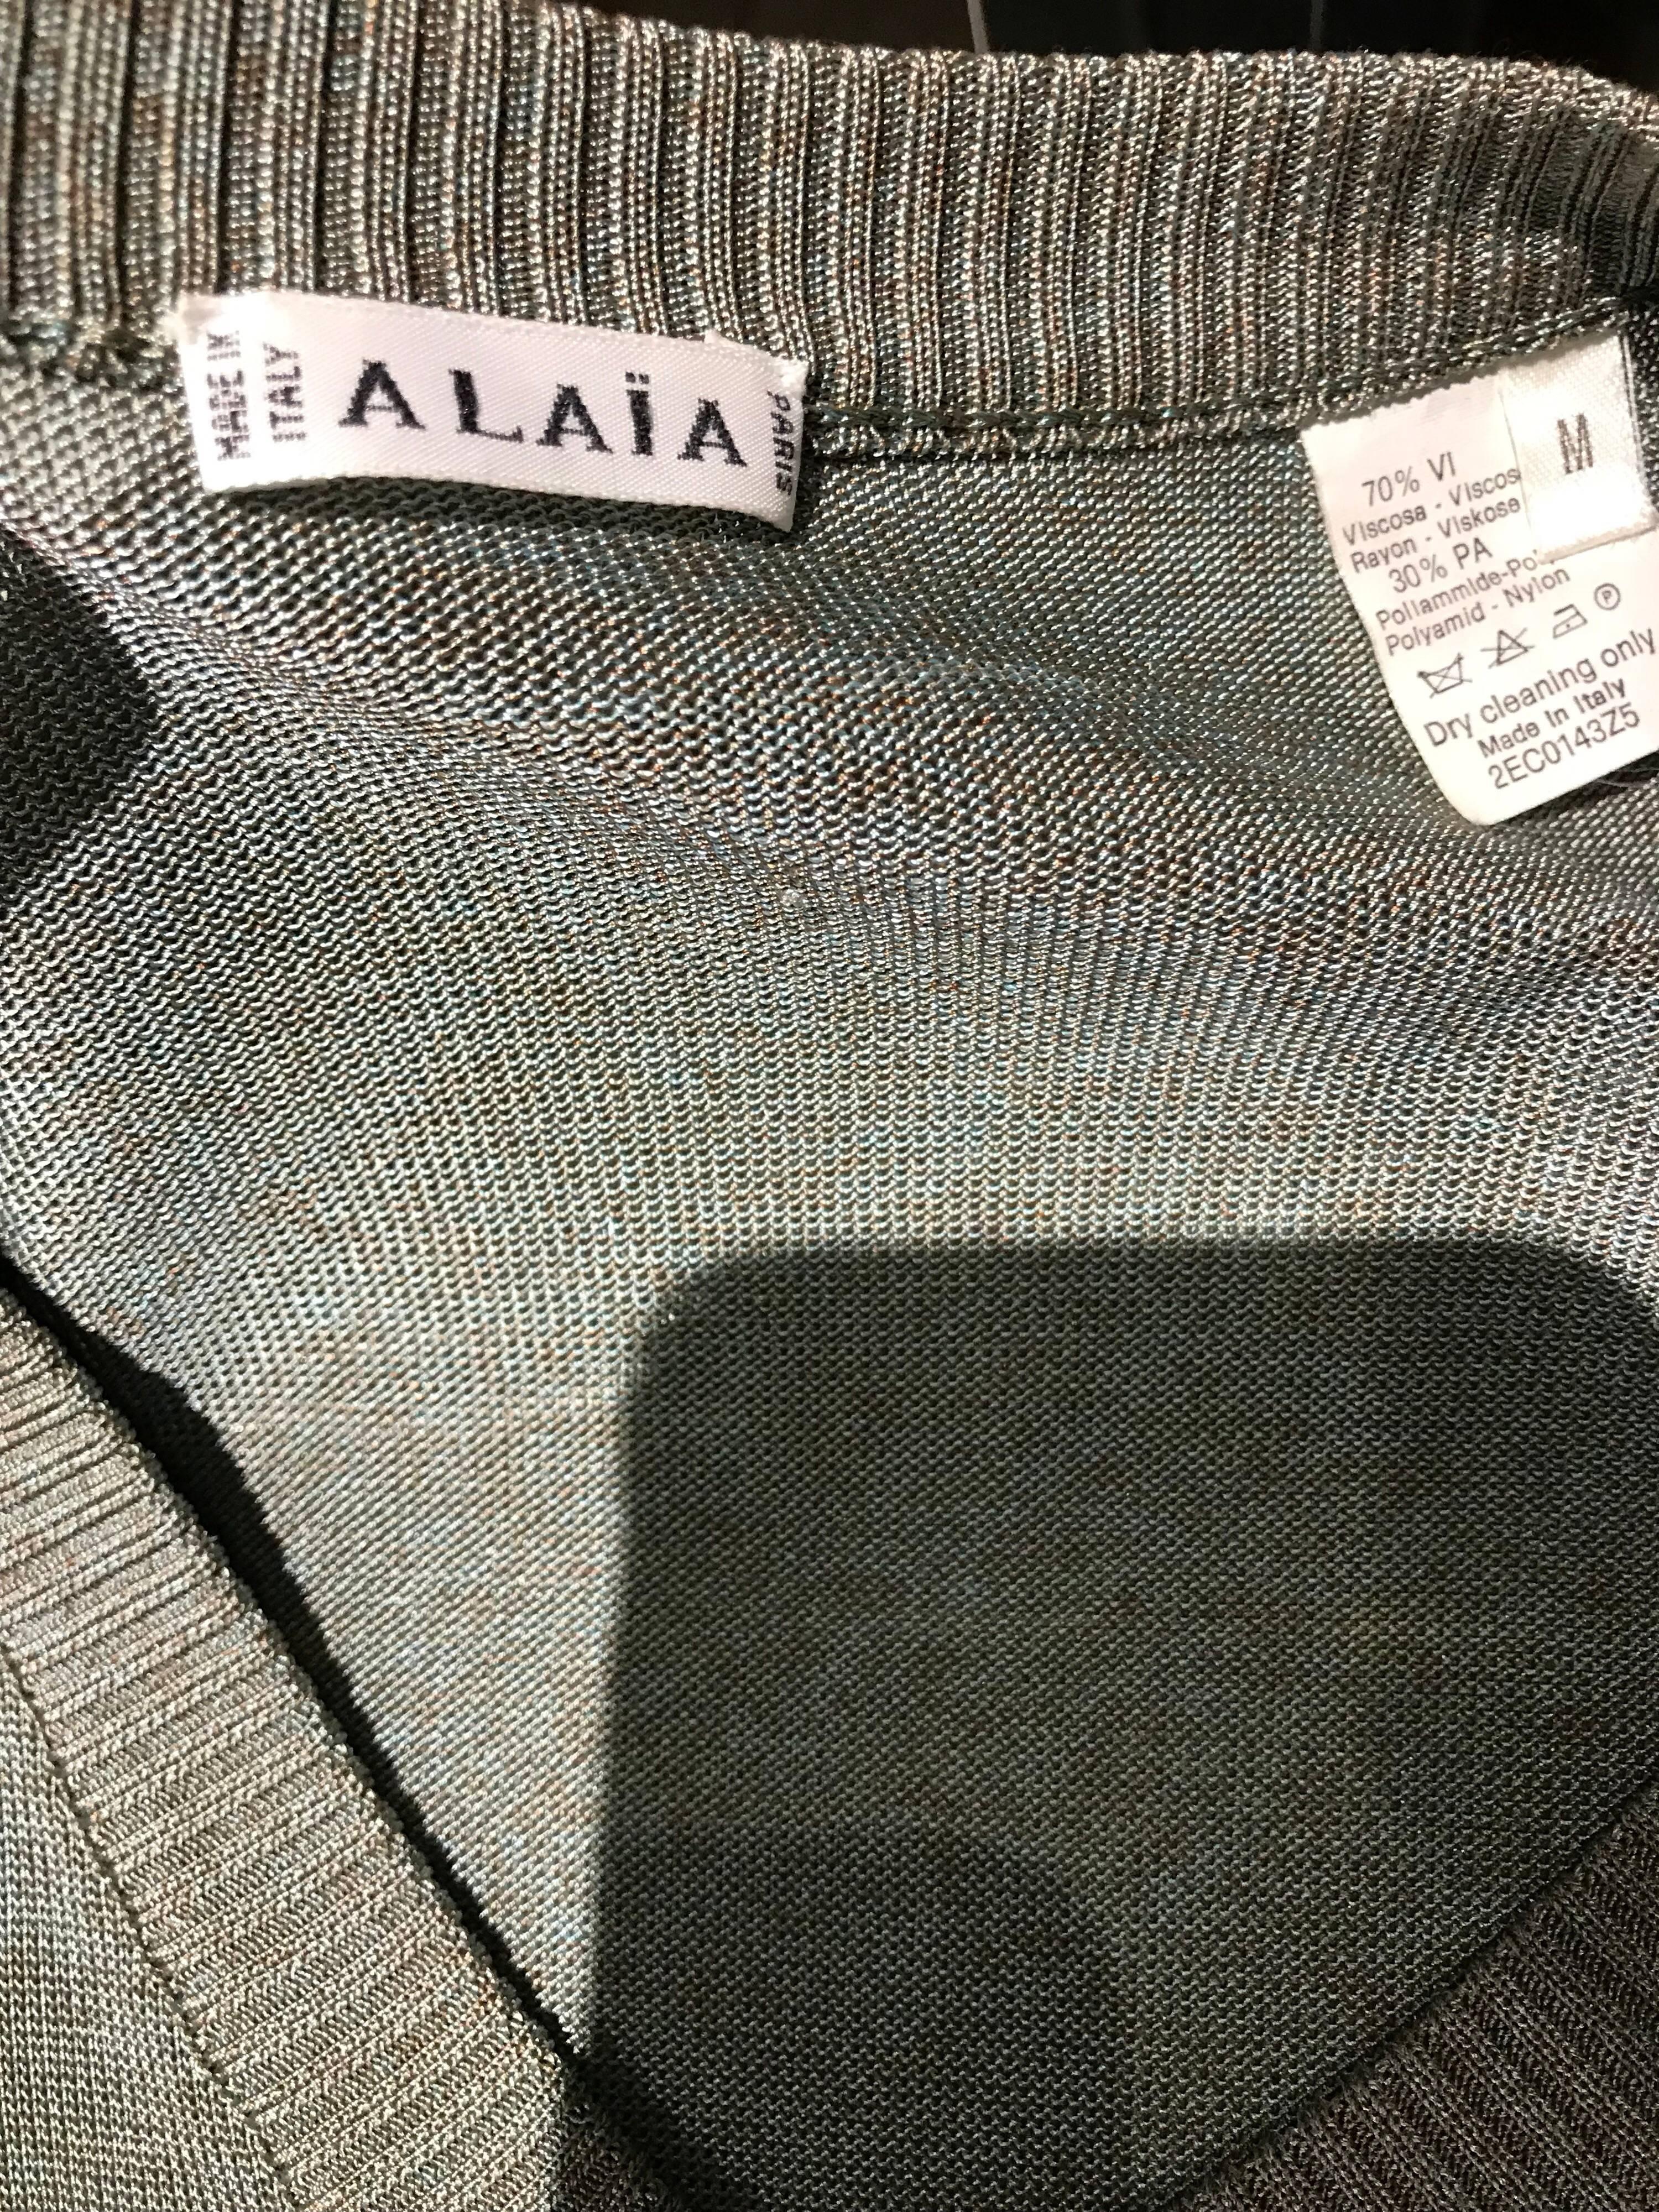 Vintage ALAIA Green Knit Top and Skirt Set In Good Condition For Sale In Beverly Hills, CA